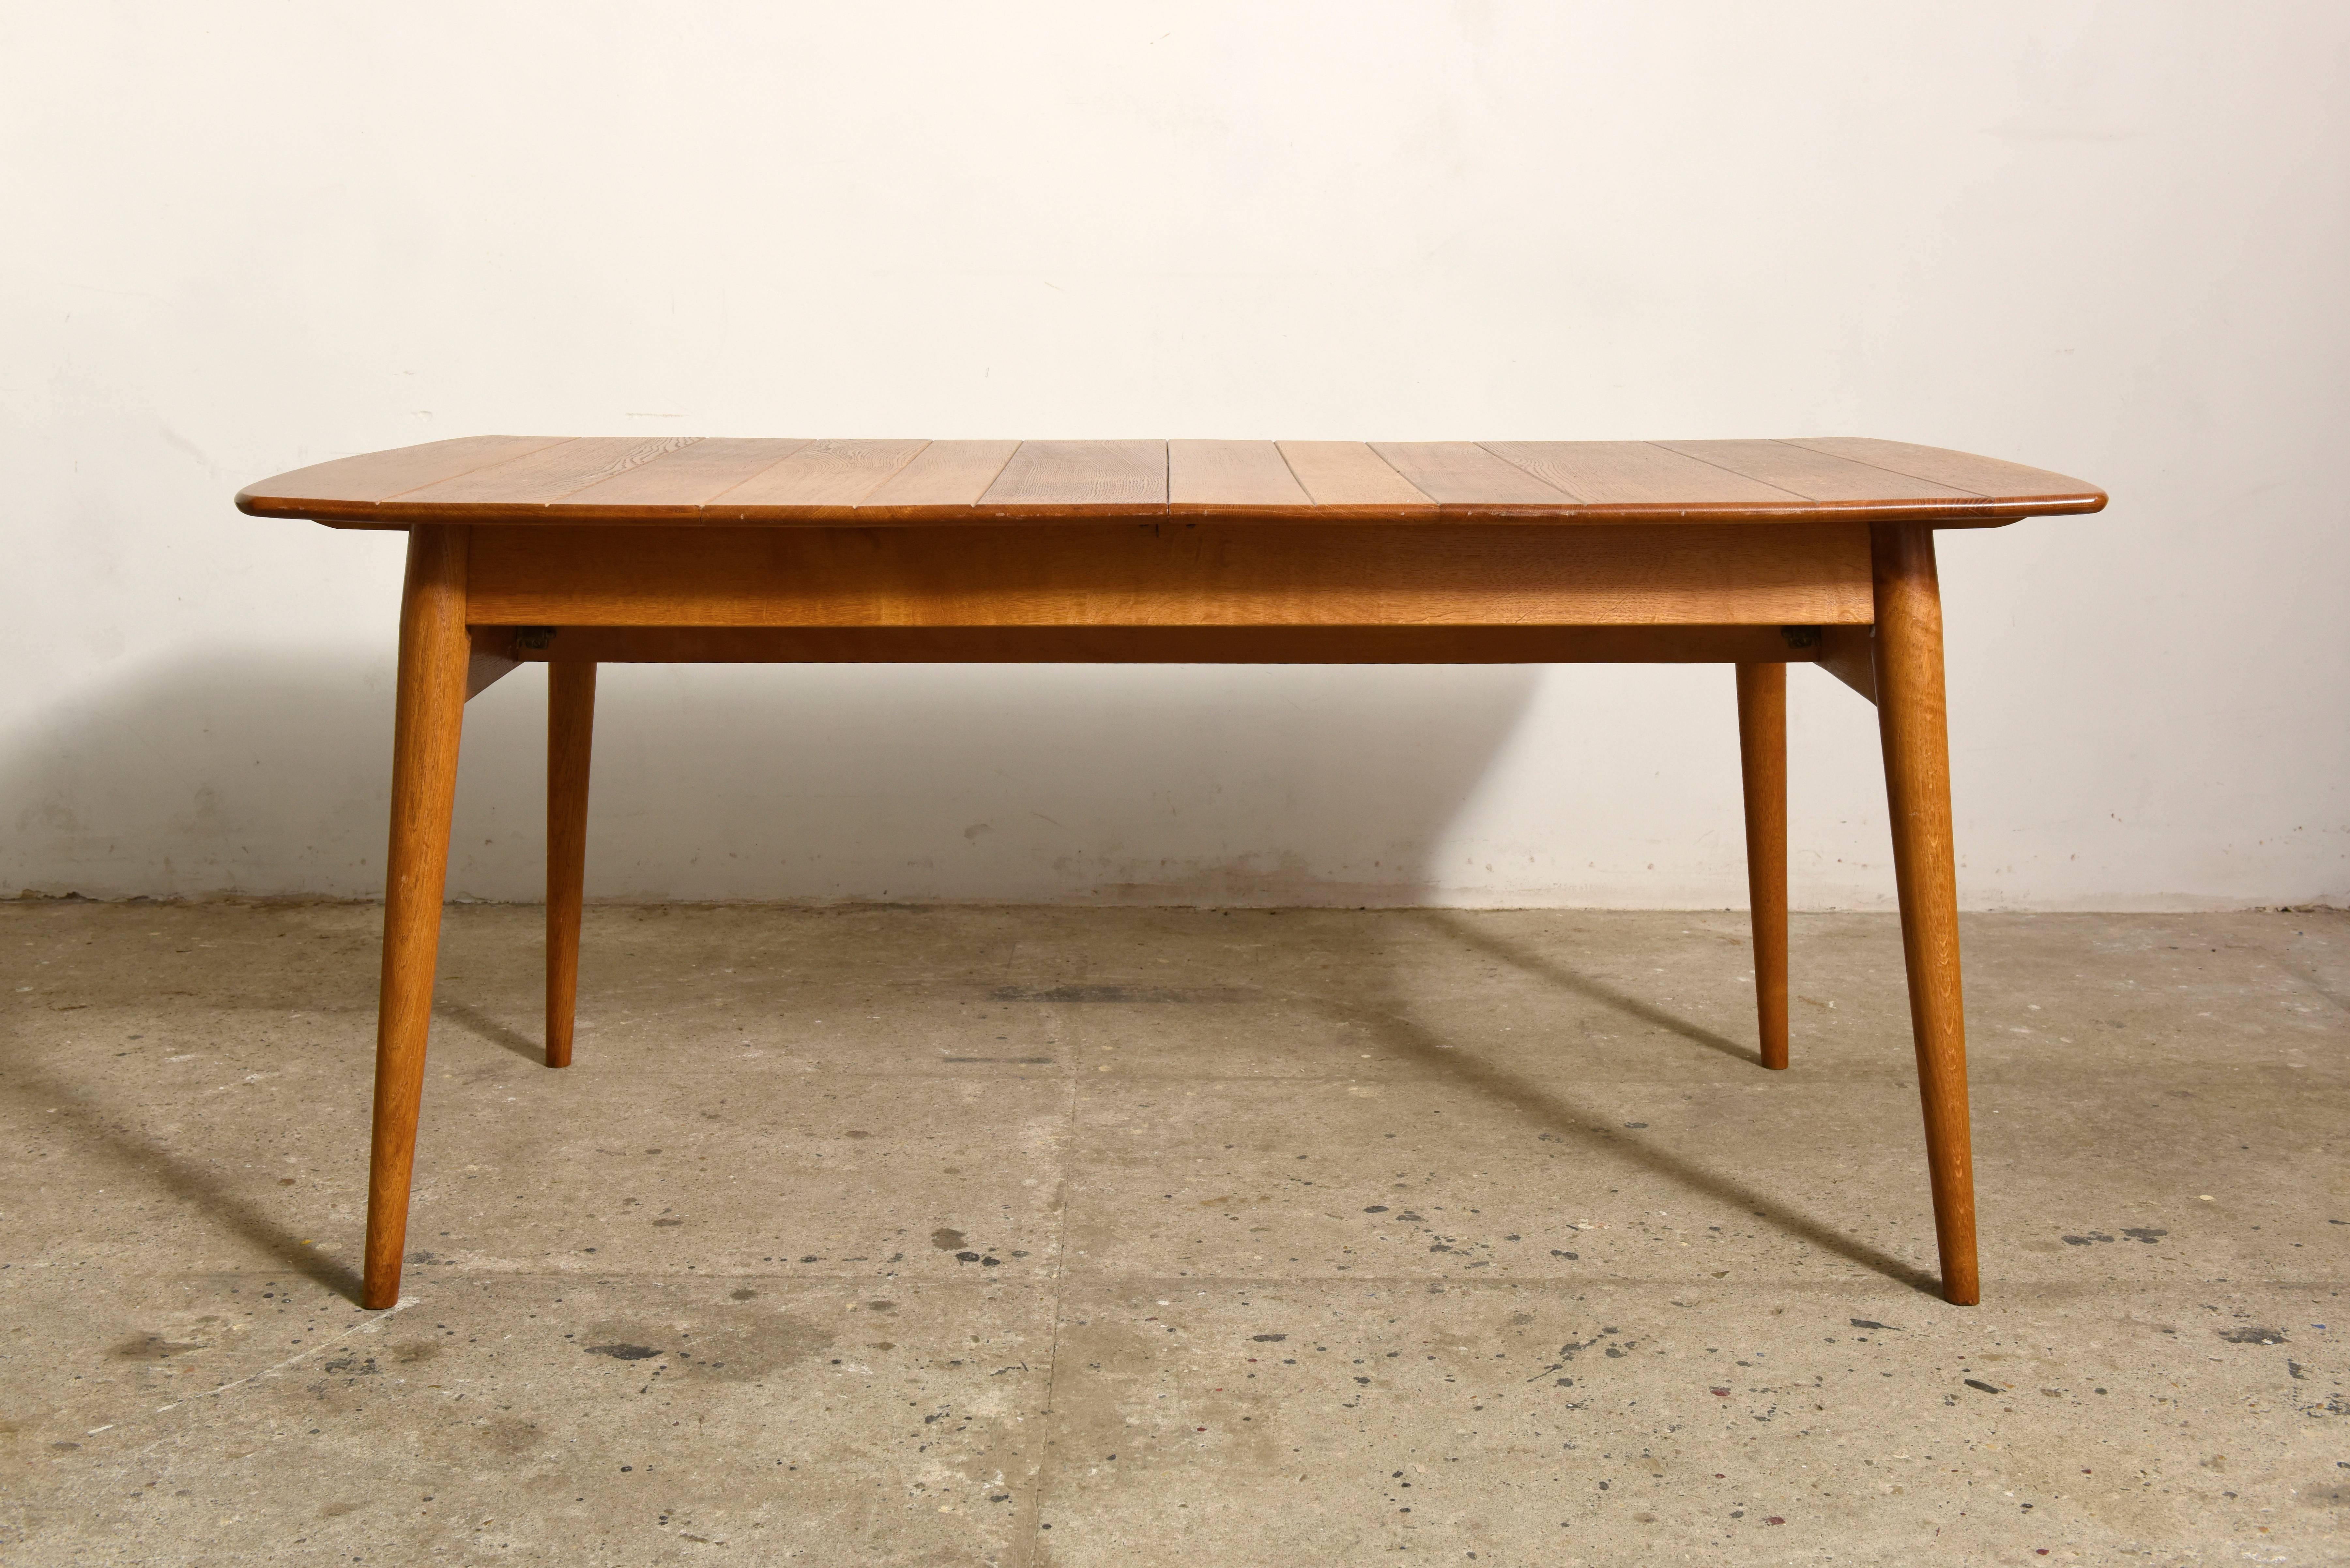 Beautiful handcrafted solid teak rectangular table to be extended with an intermediate leaf of 46 cm to a total length of 214 cm with an accent of tapered legs which gives the table an elegant look, the top of the table is a piece of solid teak